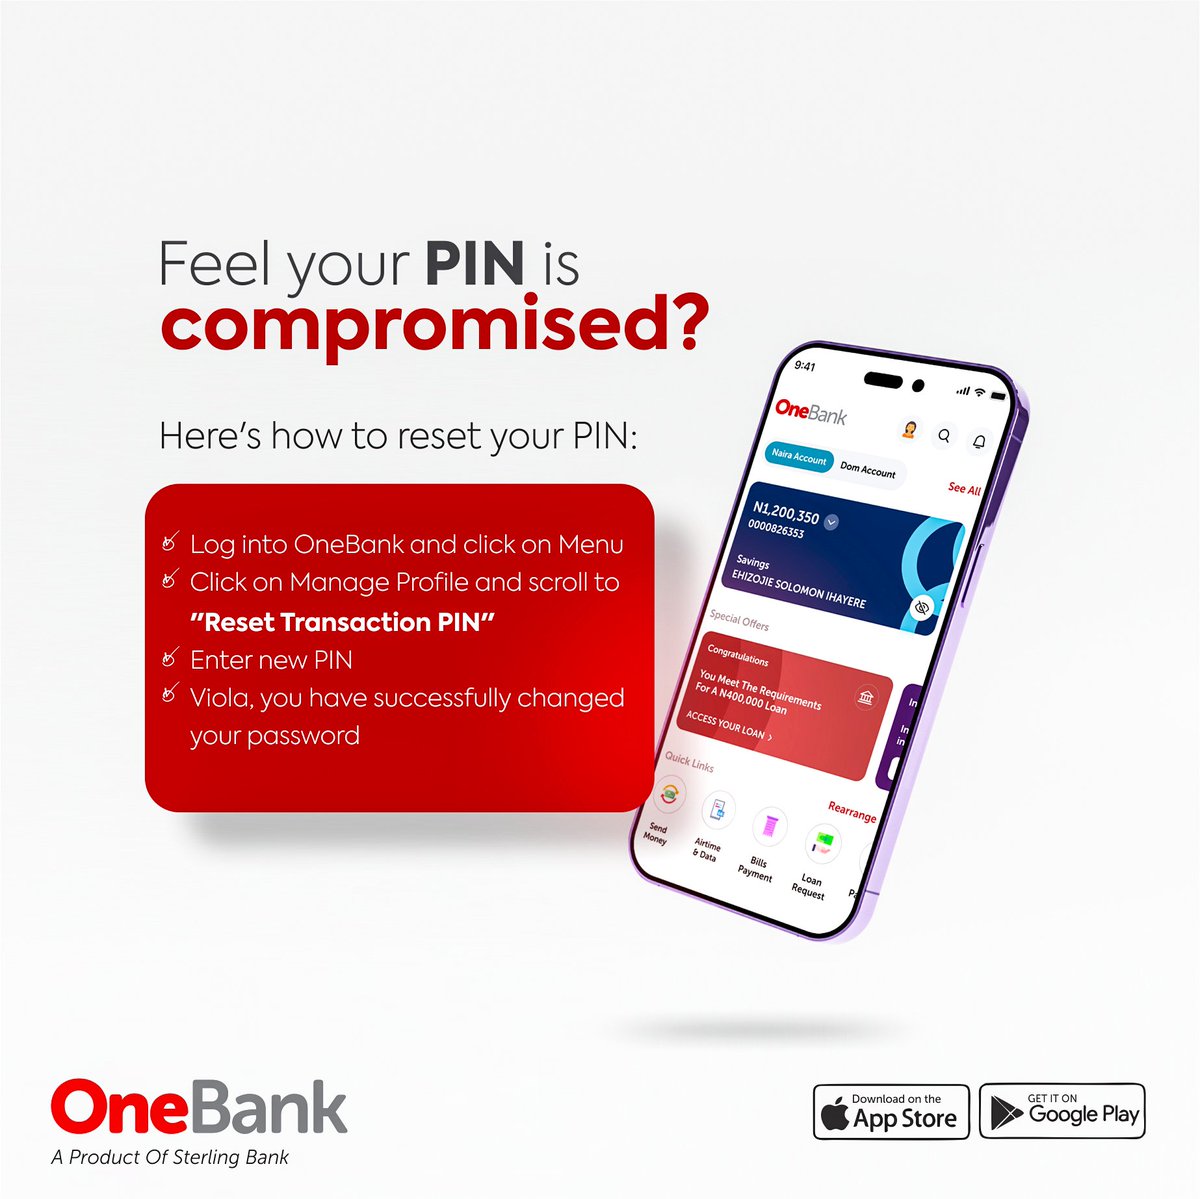 Need to reset your PIN? - Log into OneBank - ⁠Tap on Menu - ⁠Tap on Manage Profile and then Reset Transaction PIN - Enter new PIN - ⁠Voila, you've successfully changed your PIN #OneBank #OneBankBySterling #ANewWayToLive